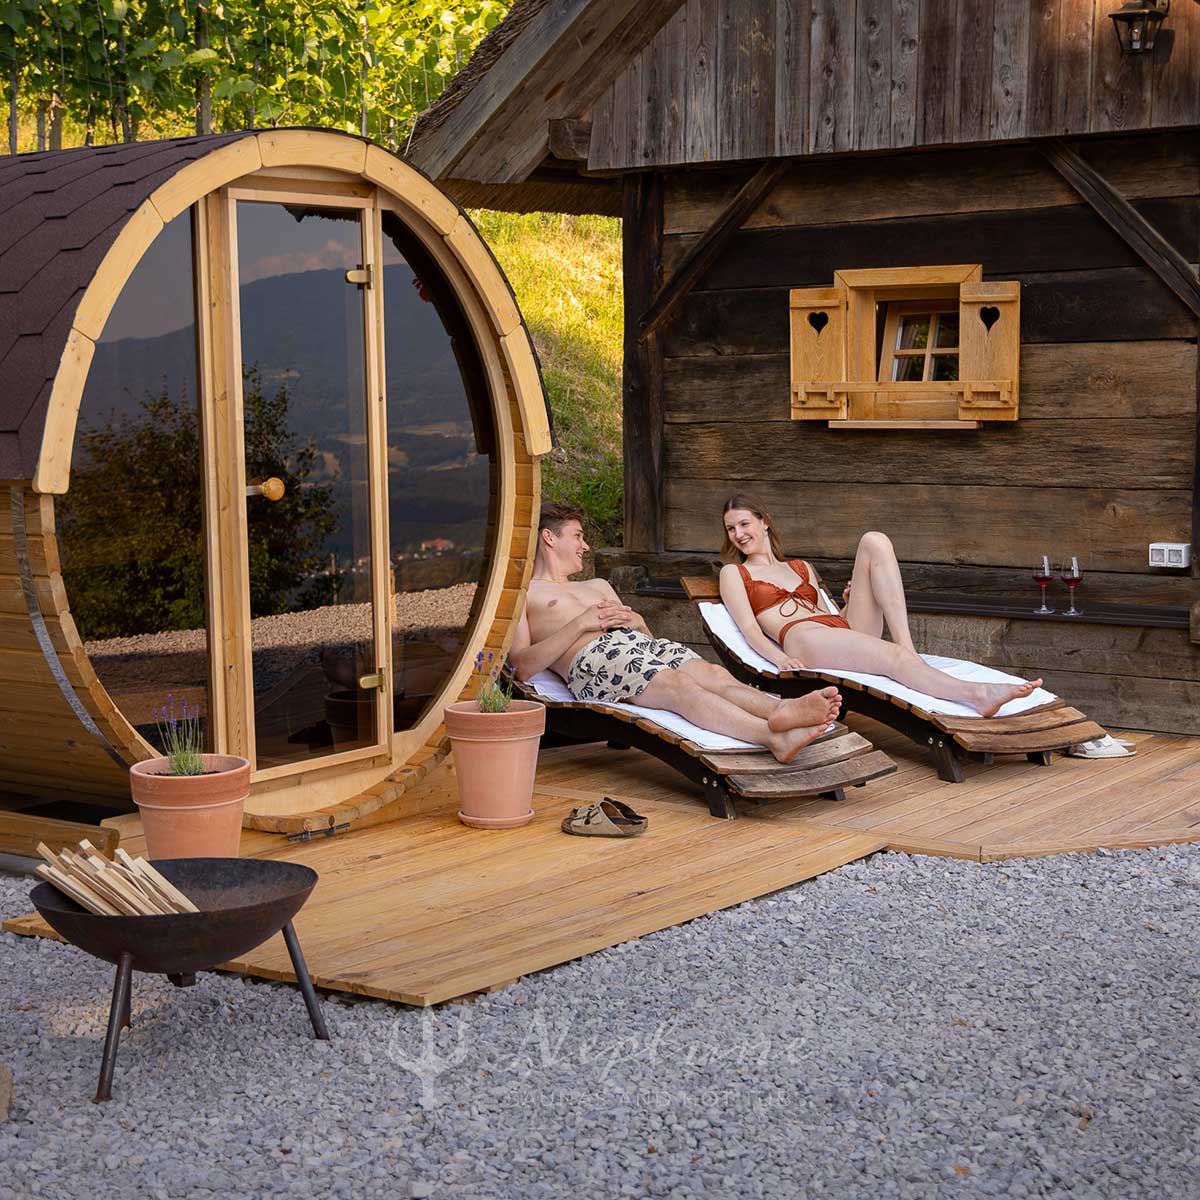 neptune sauna supplier - wholesale saunas for hospitality - couple on sunbeds next to malmo 2 person sauna